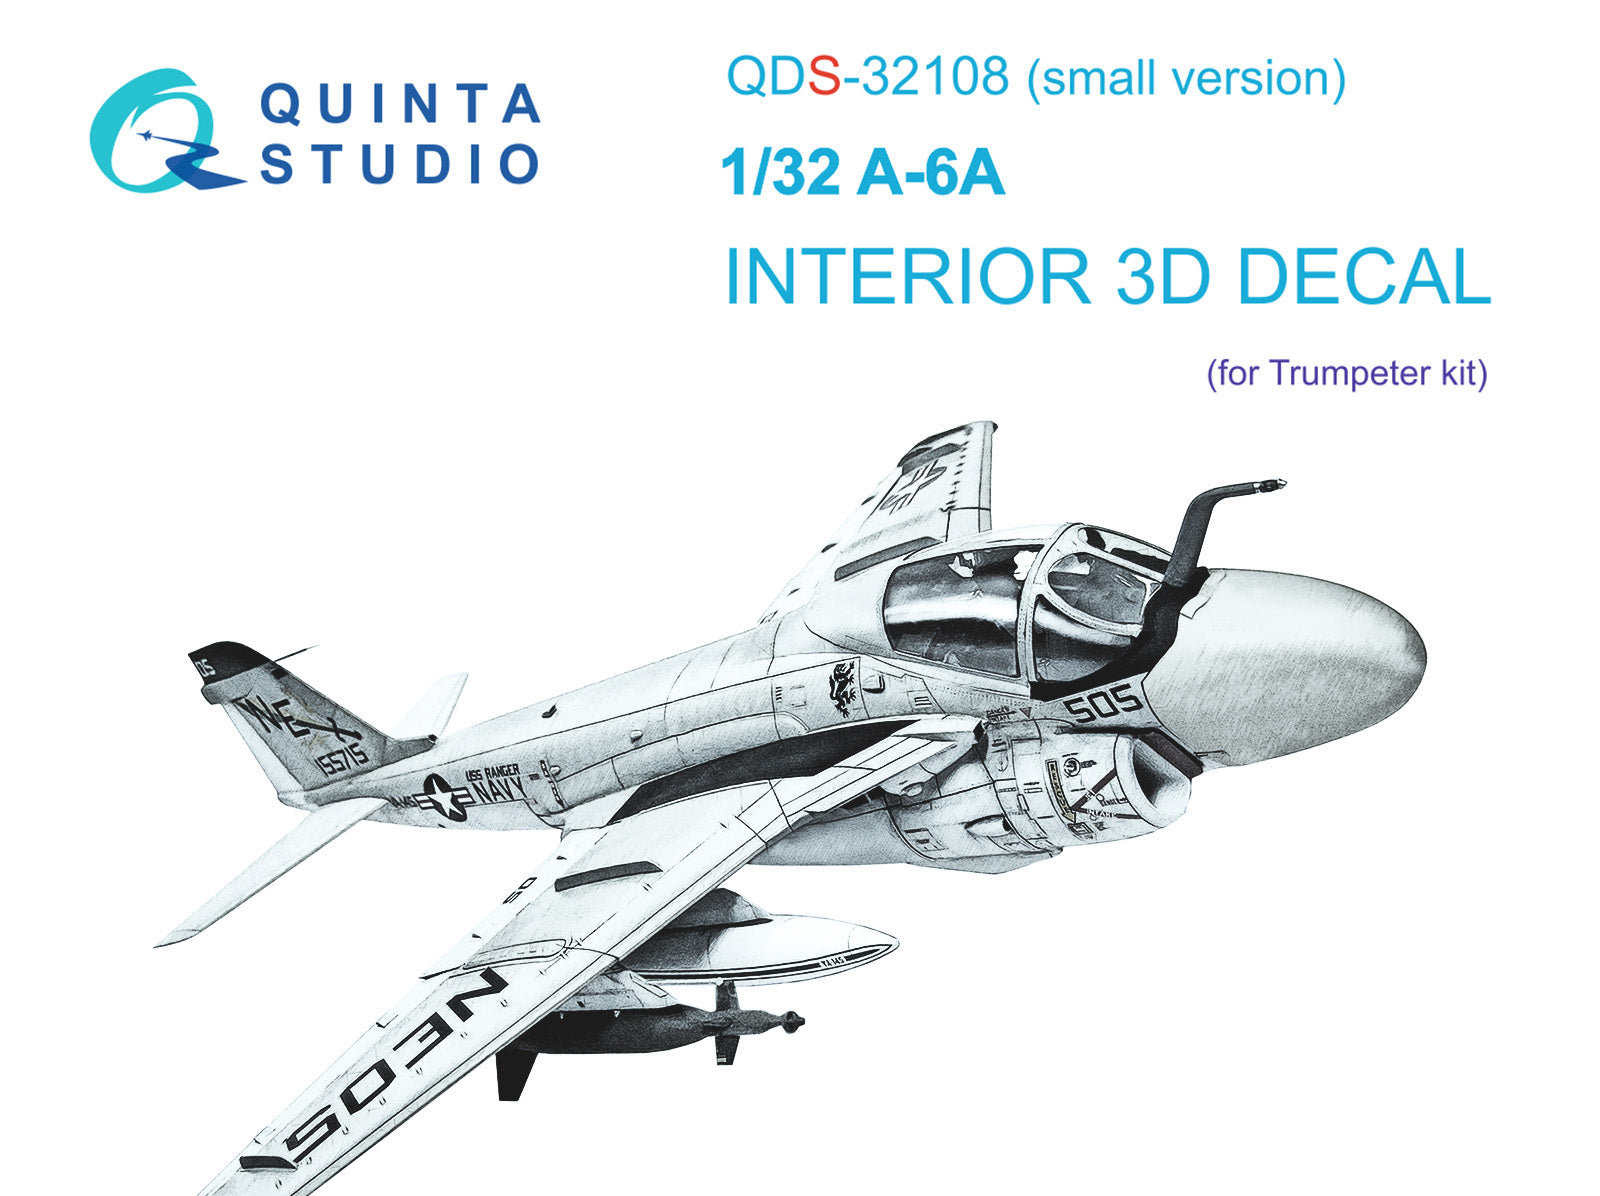 Quinta Studio - 1/32 A-6A QDS-32108 for Trumpeter kit (small version)